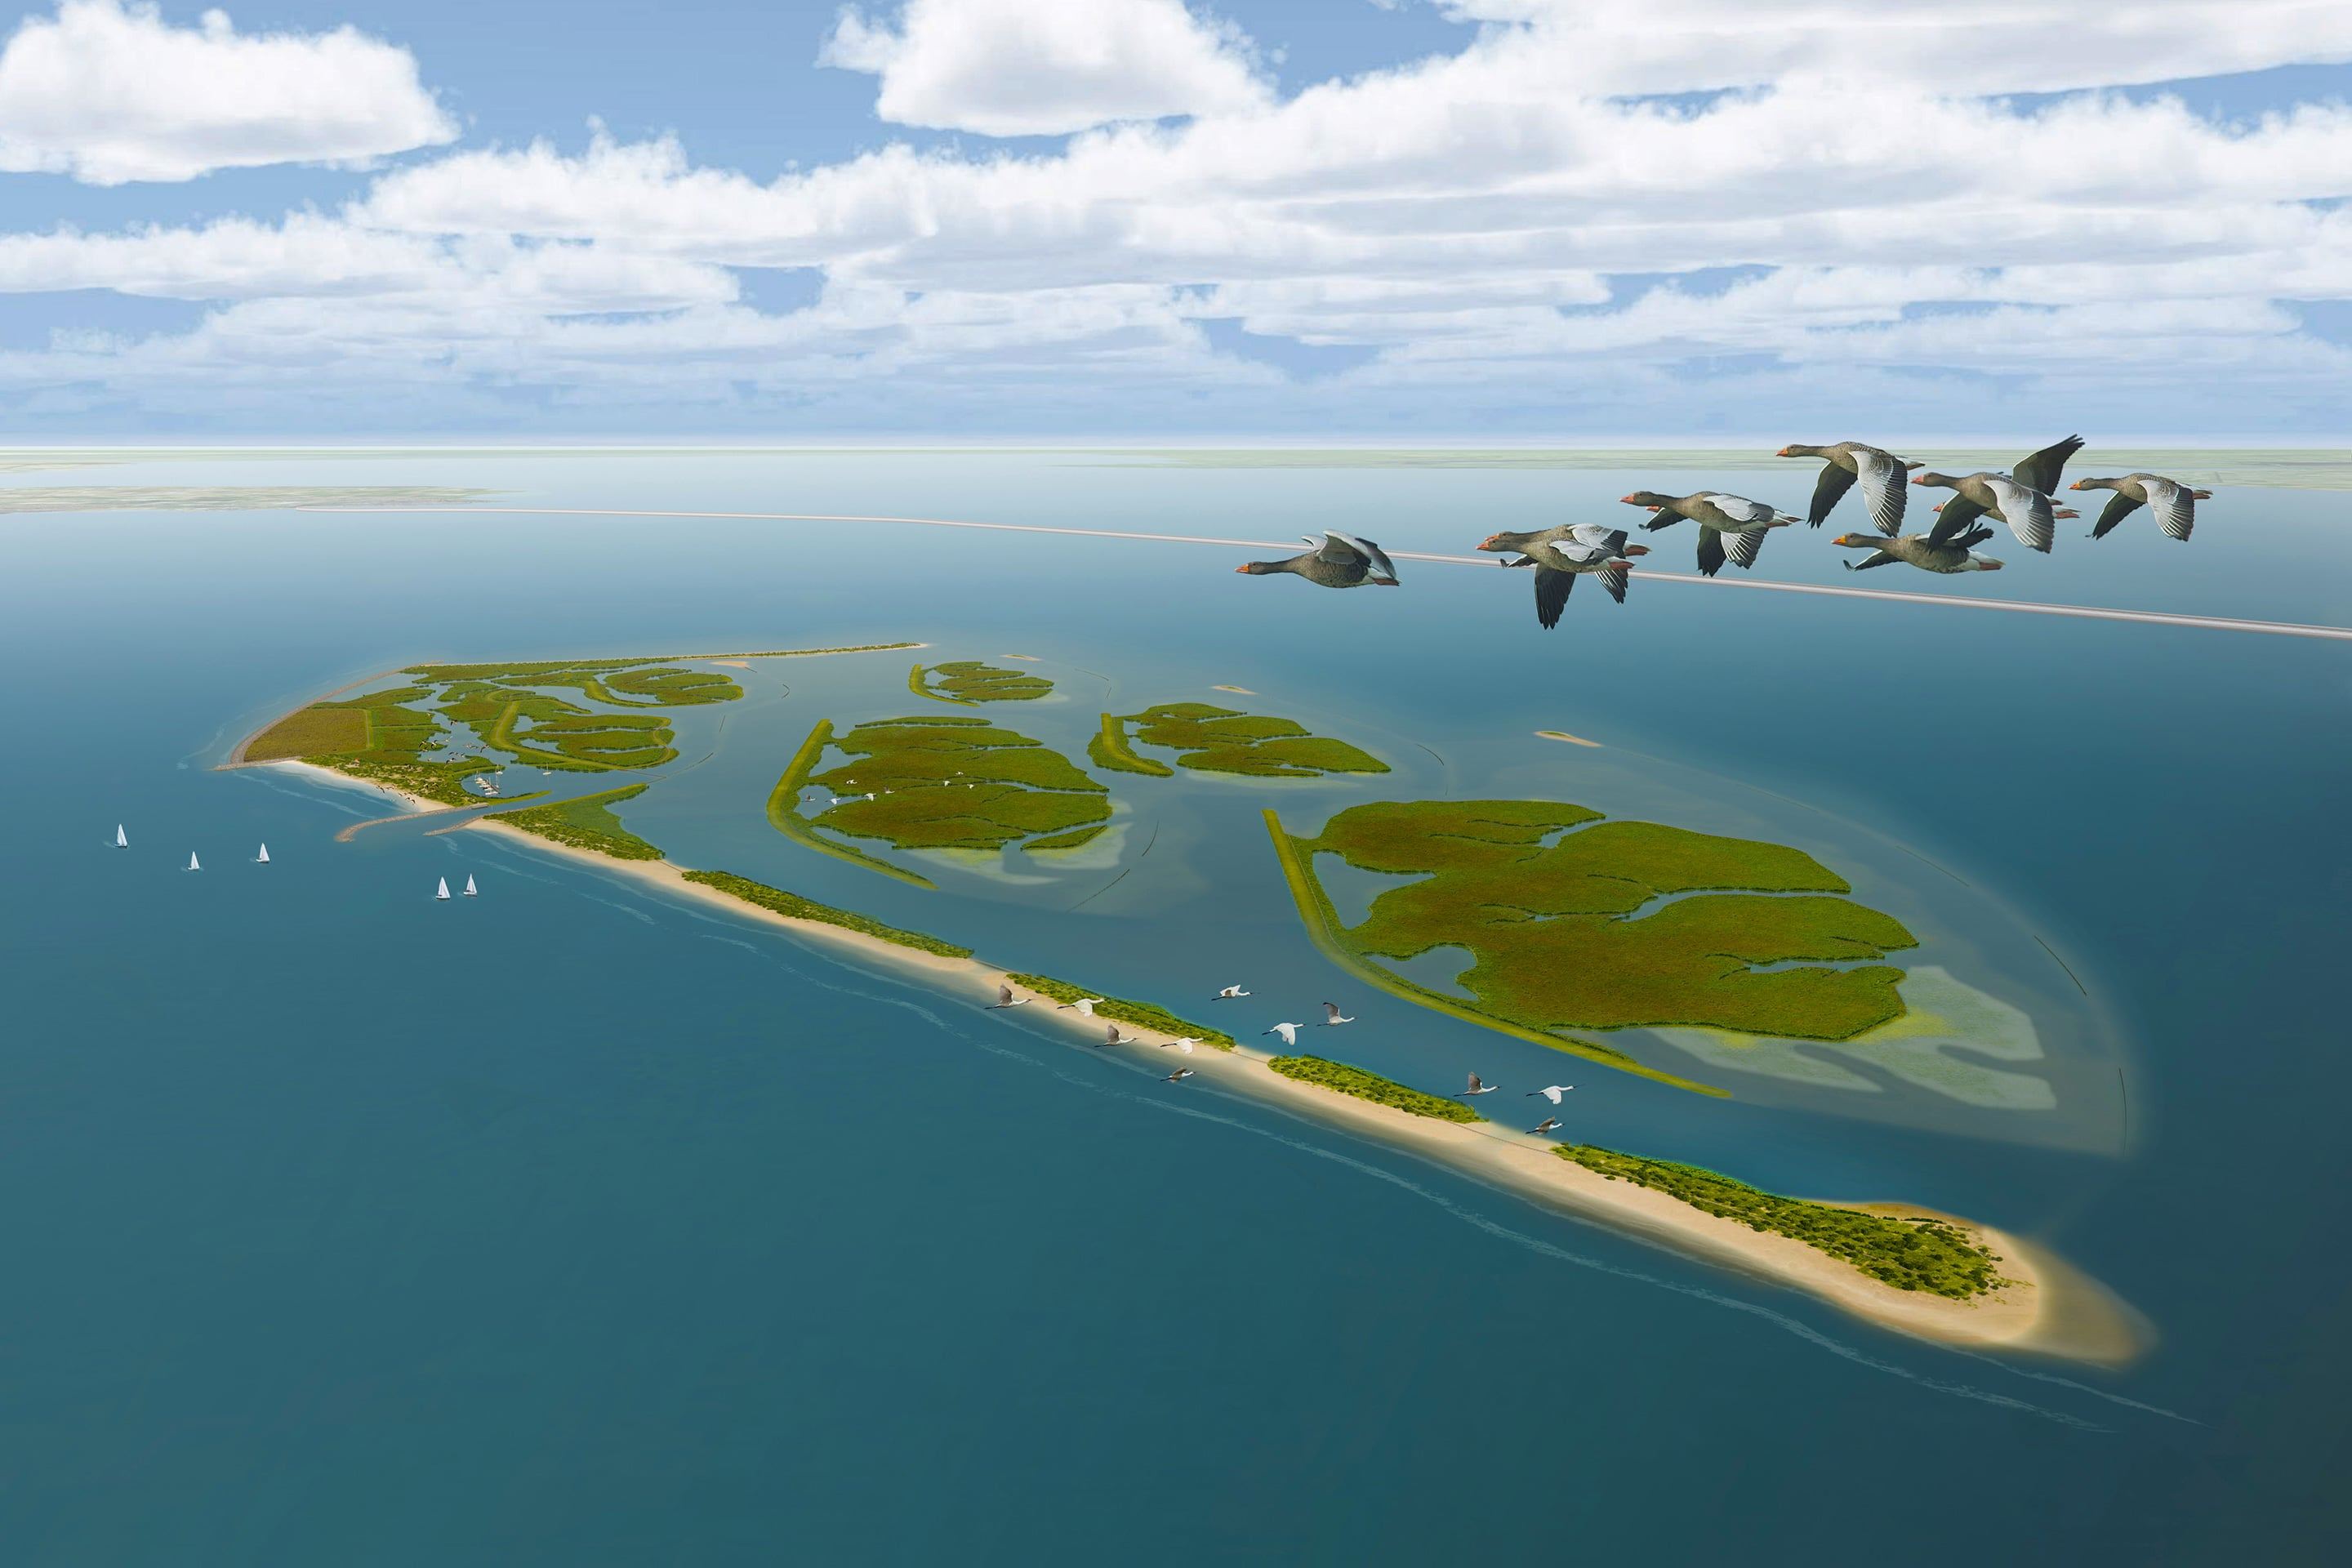 Artist impression of the Marker Wadden project